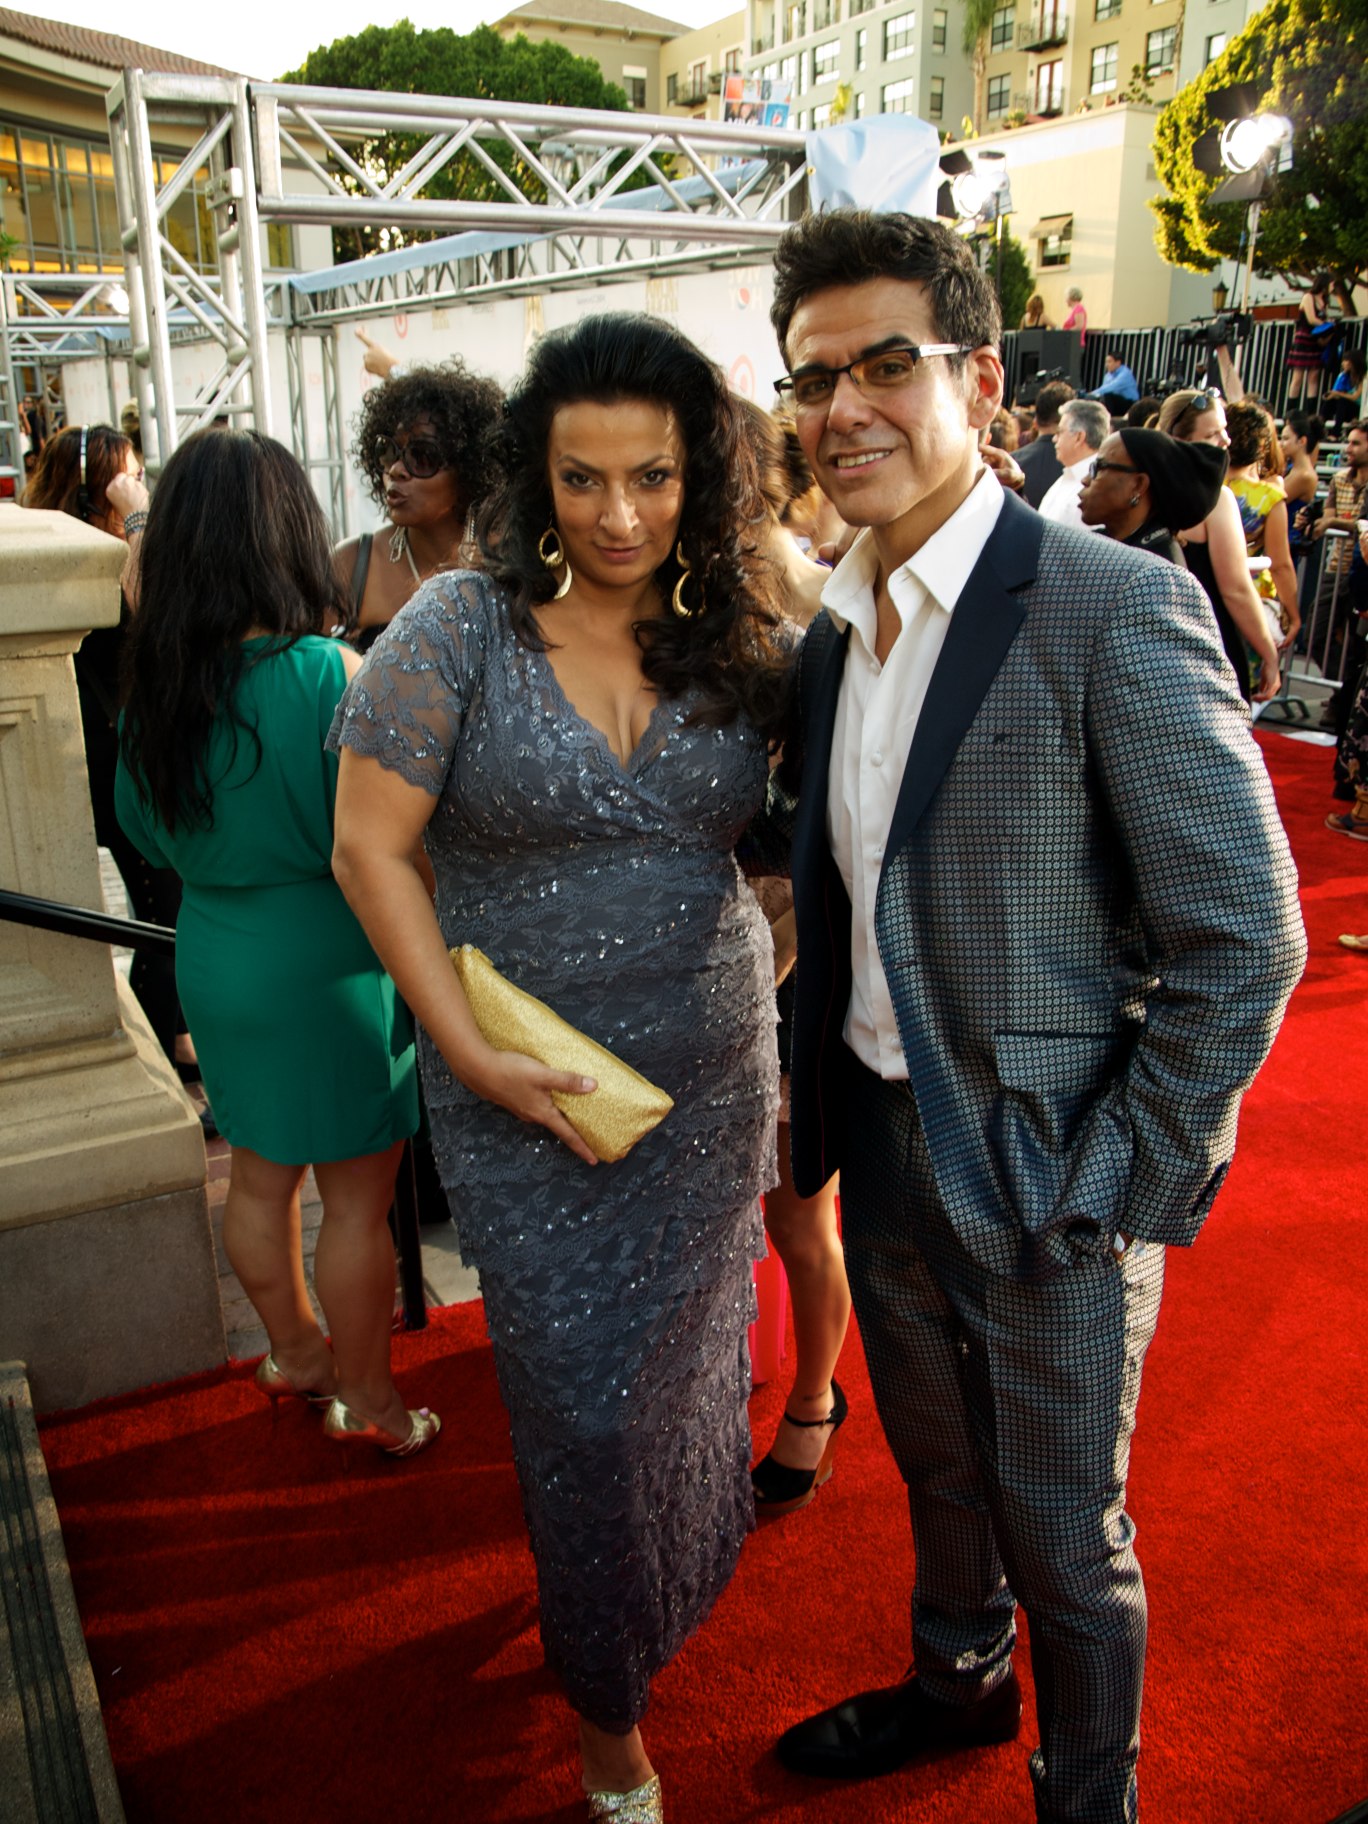 man and woman posing at a red carpet event